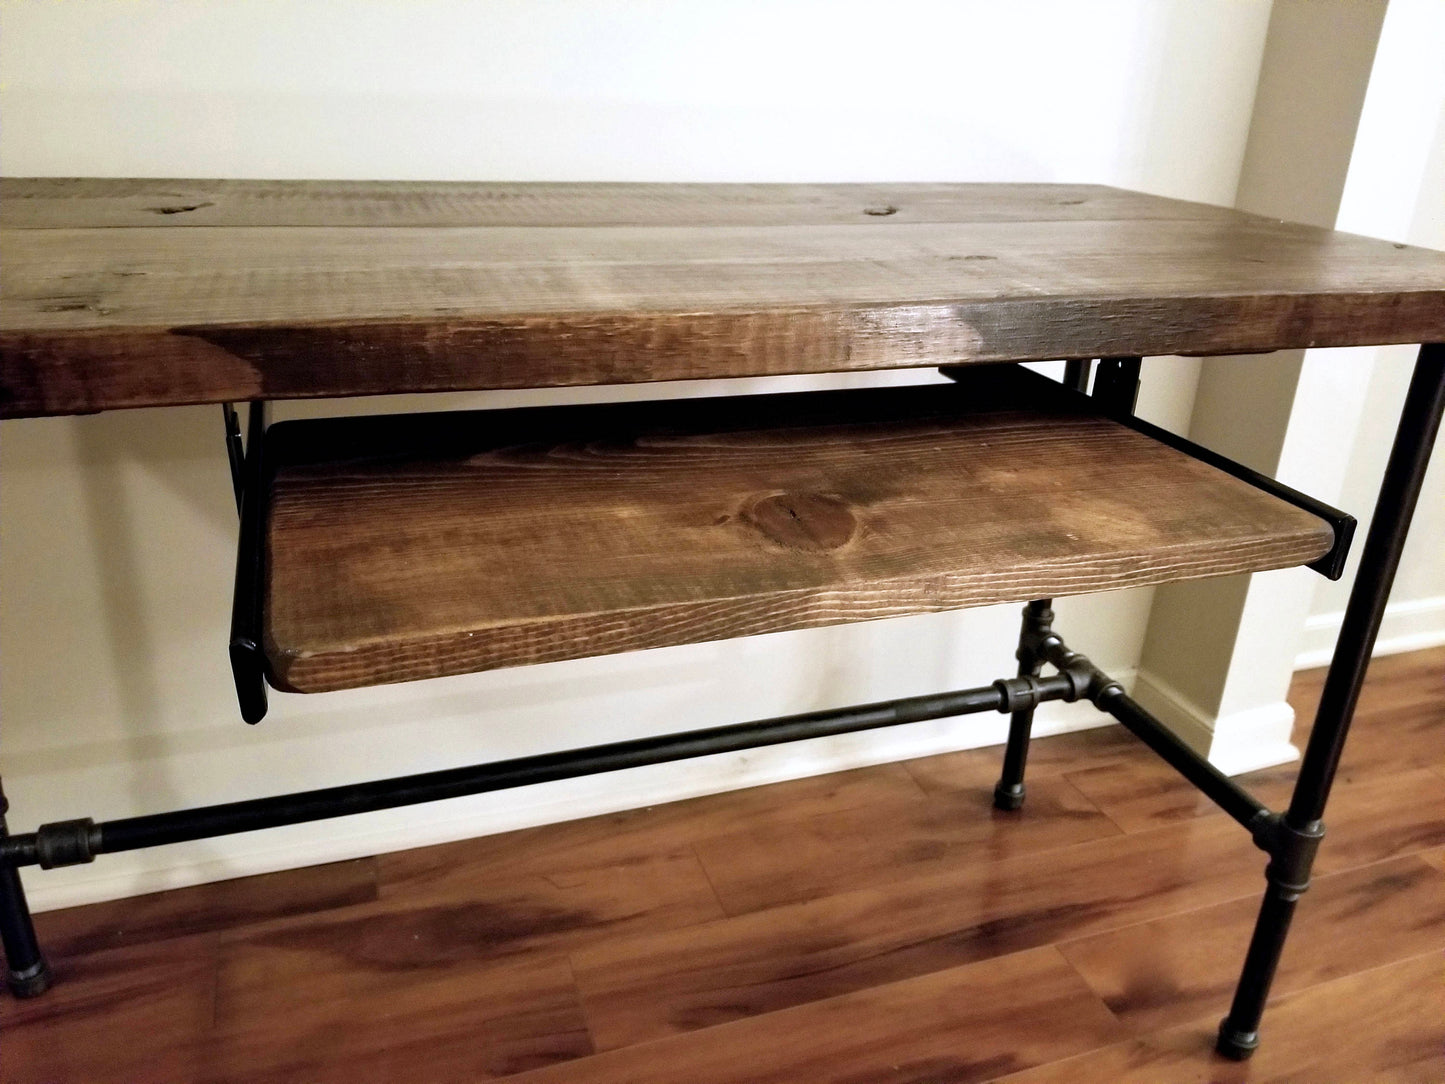 Steel and Wood Desk with Keyboard Tray